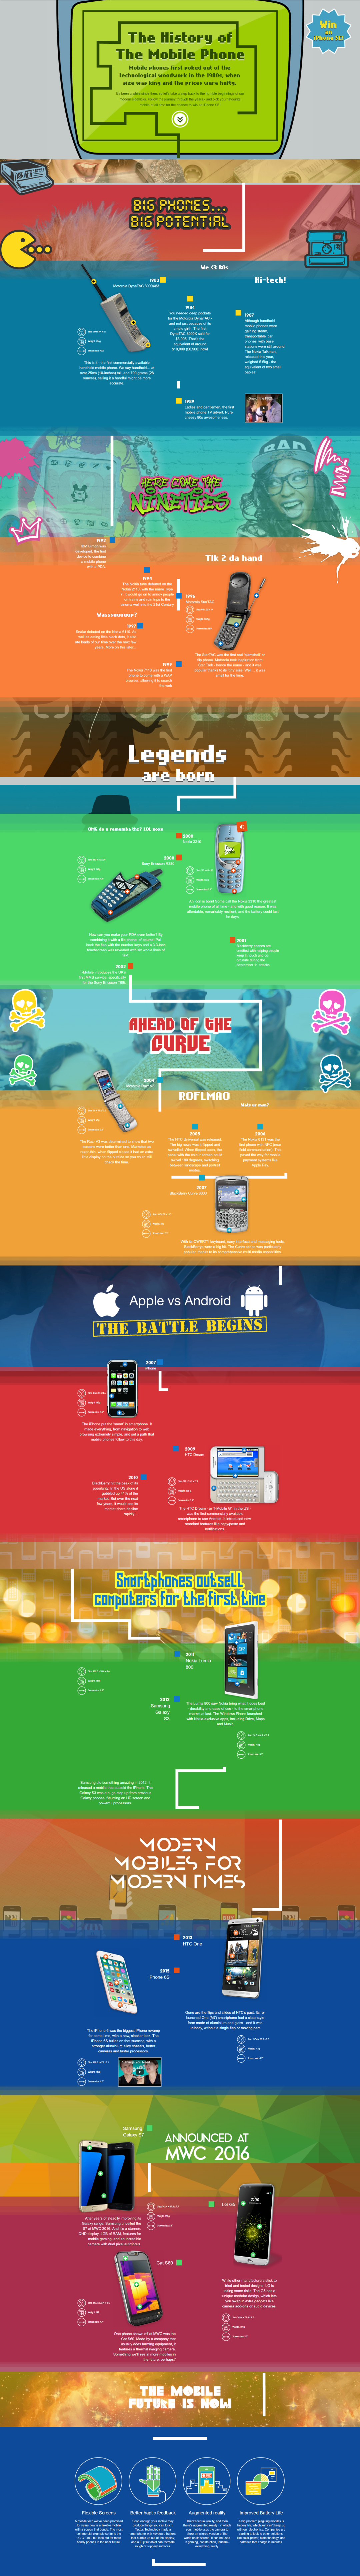 The history of the mobile phone